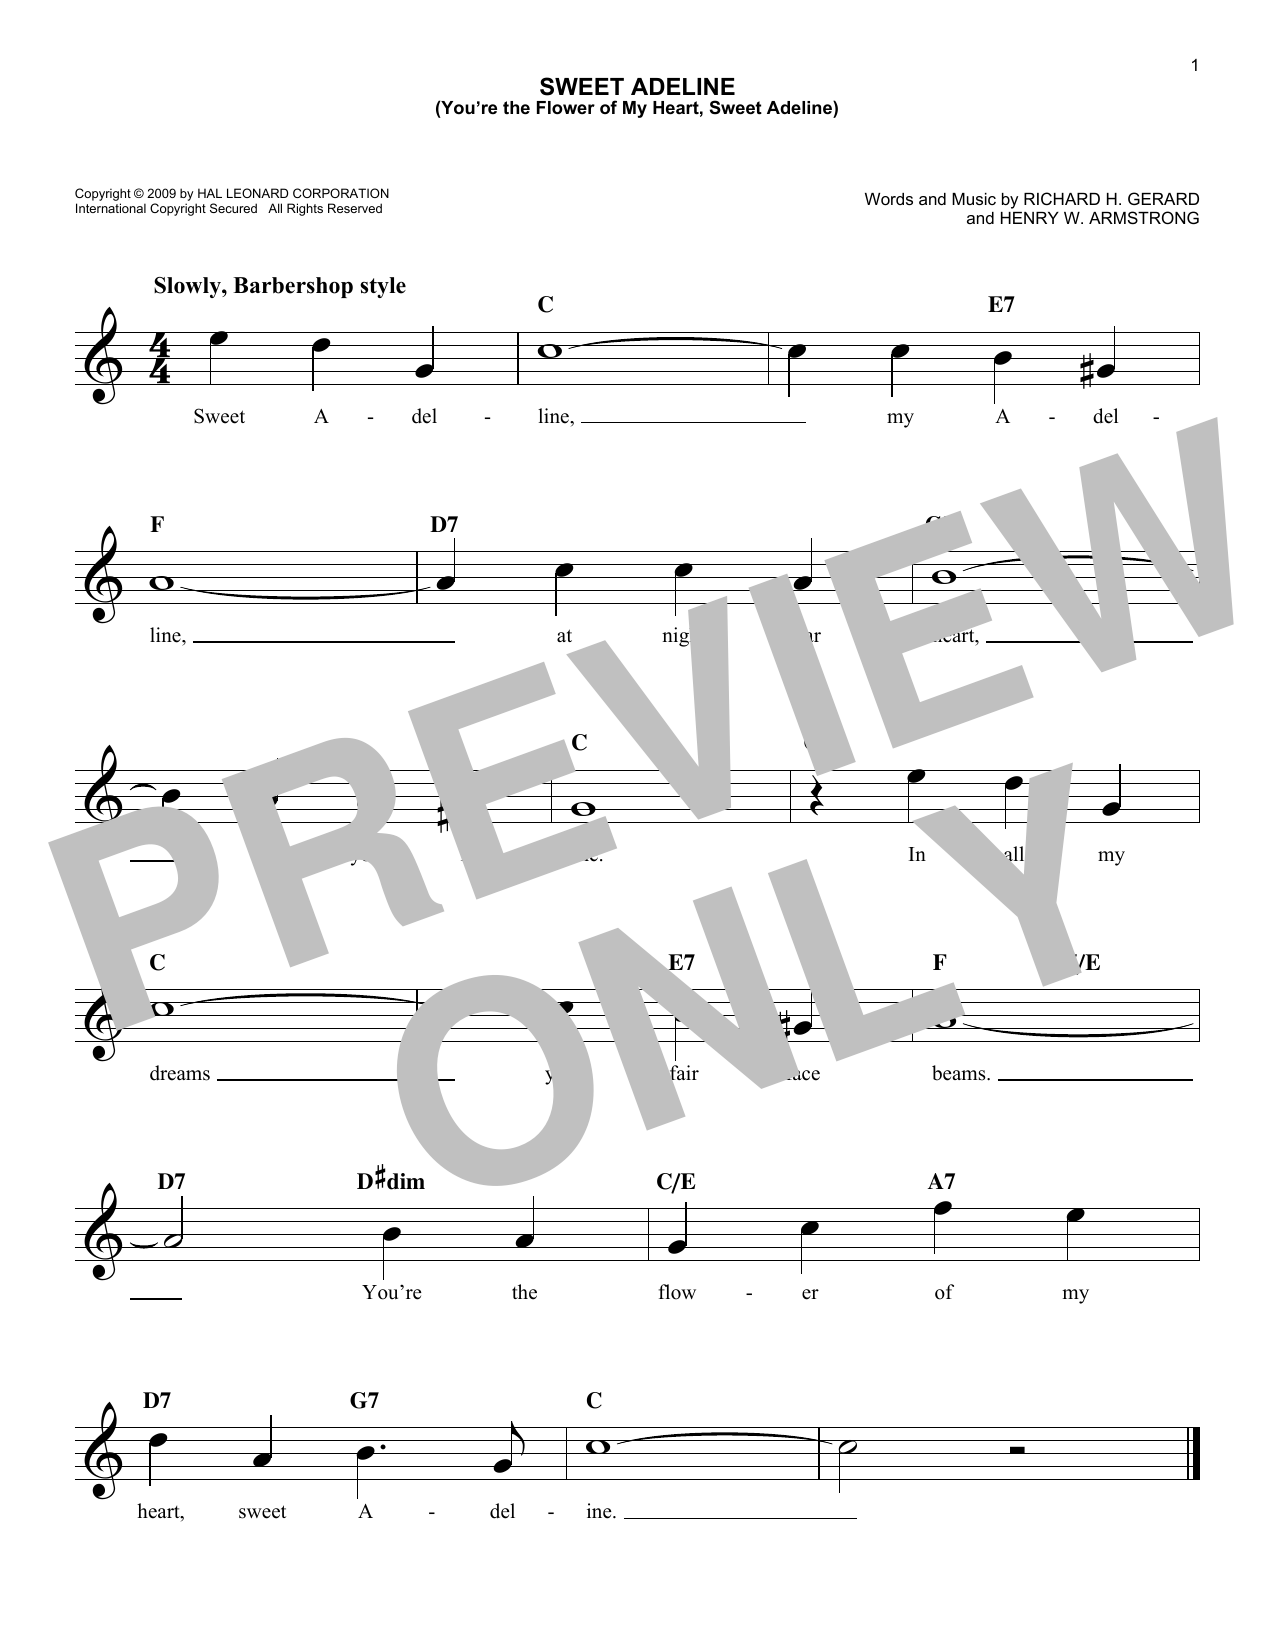 Download Richard H. Gerard Sweet Adeline (You're The Flower Of My Sheet Music